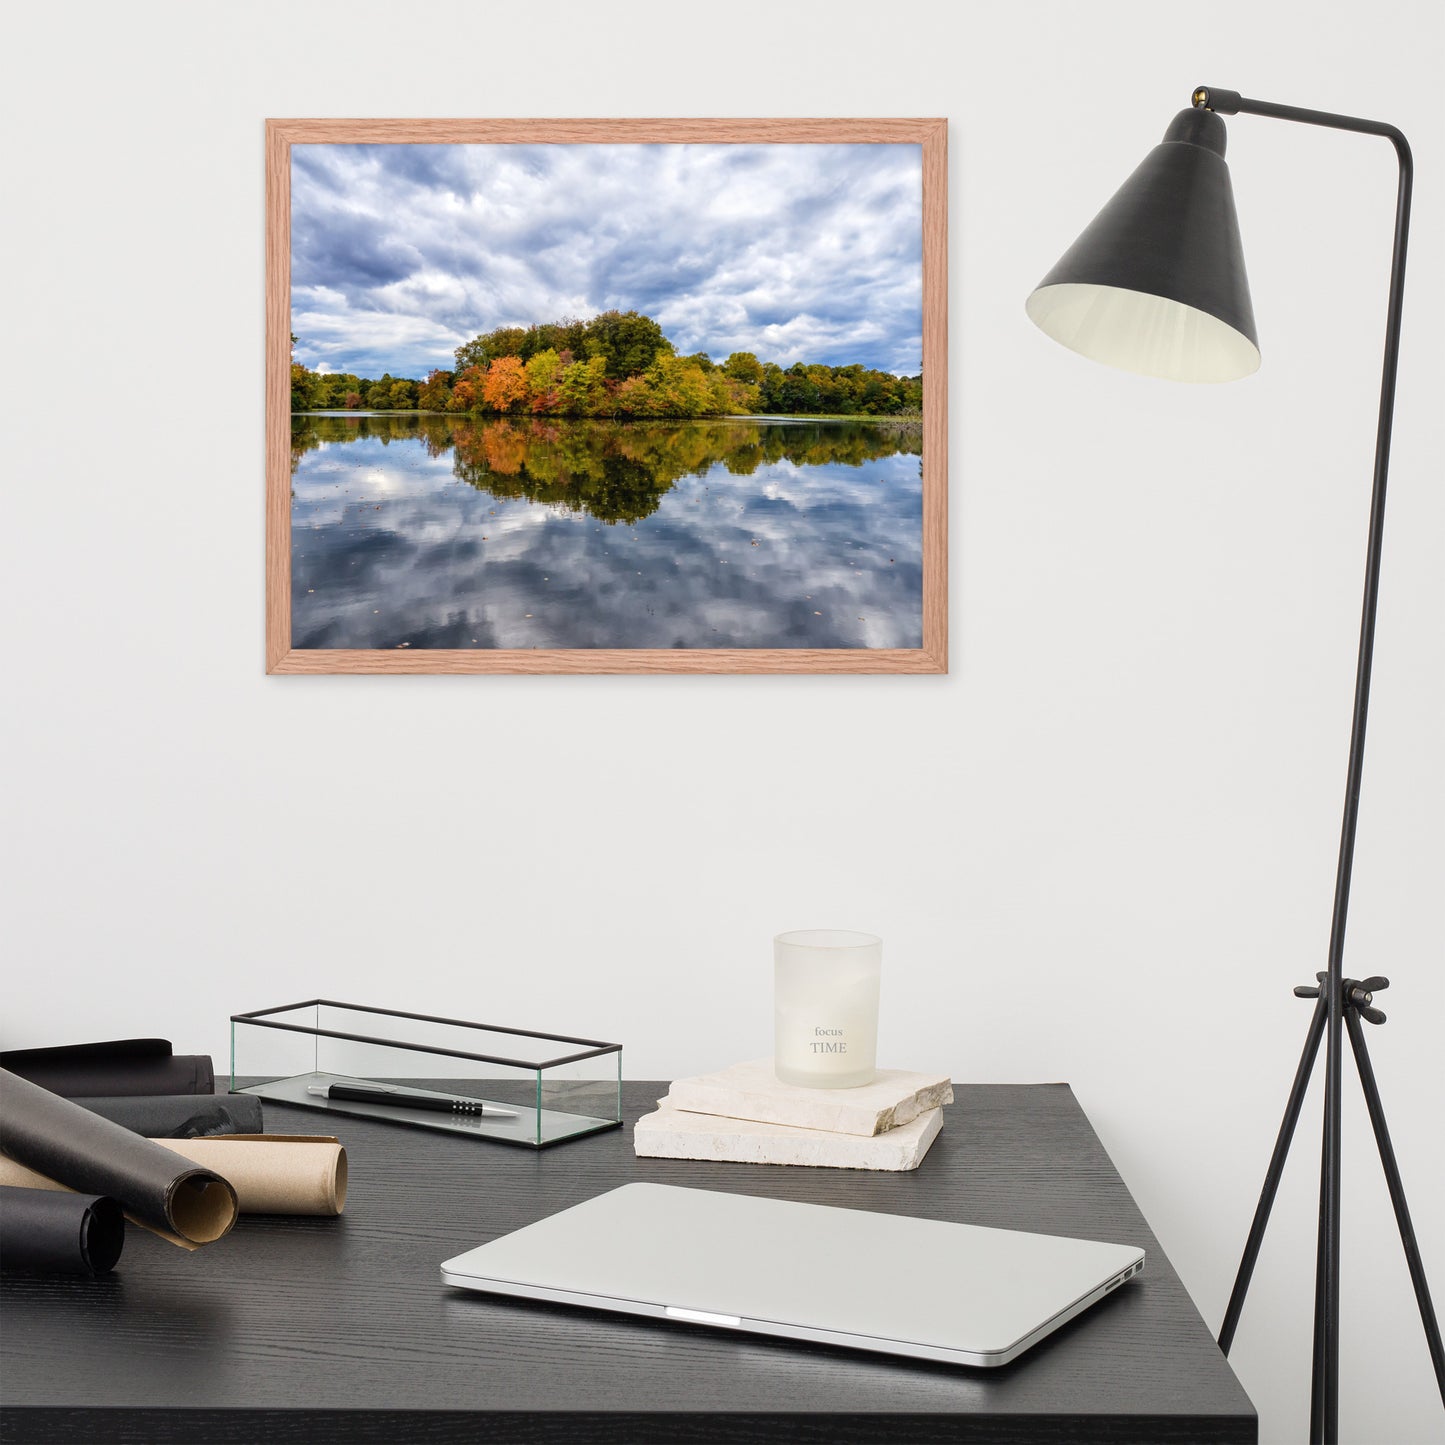 Wall Art Creative Office Wall Design: Autumn Reflections - Rural / Country / Farmhouse Style Landscape / Nature Photograph Framed Wall Art Print - Artwork